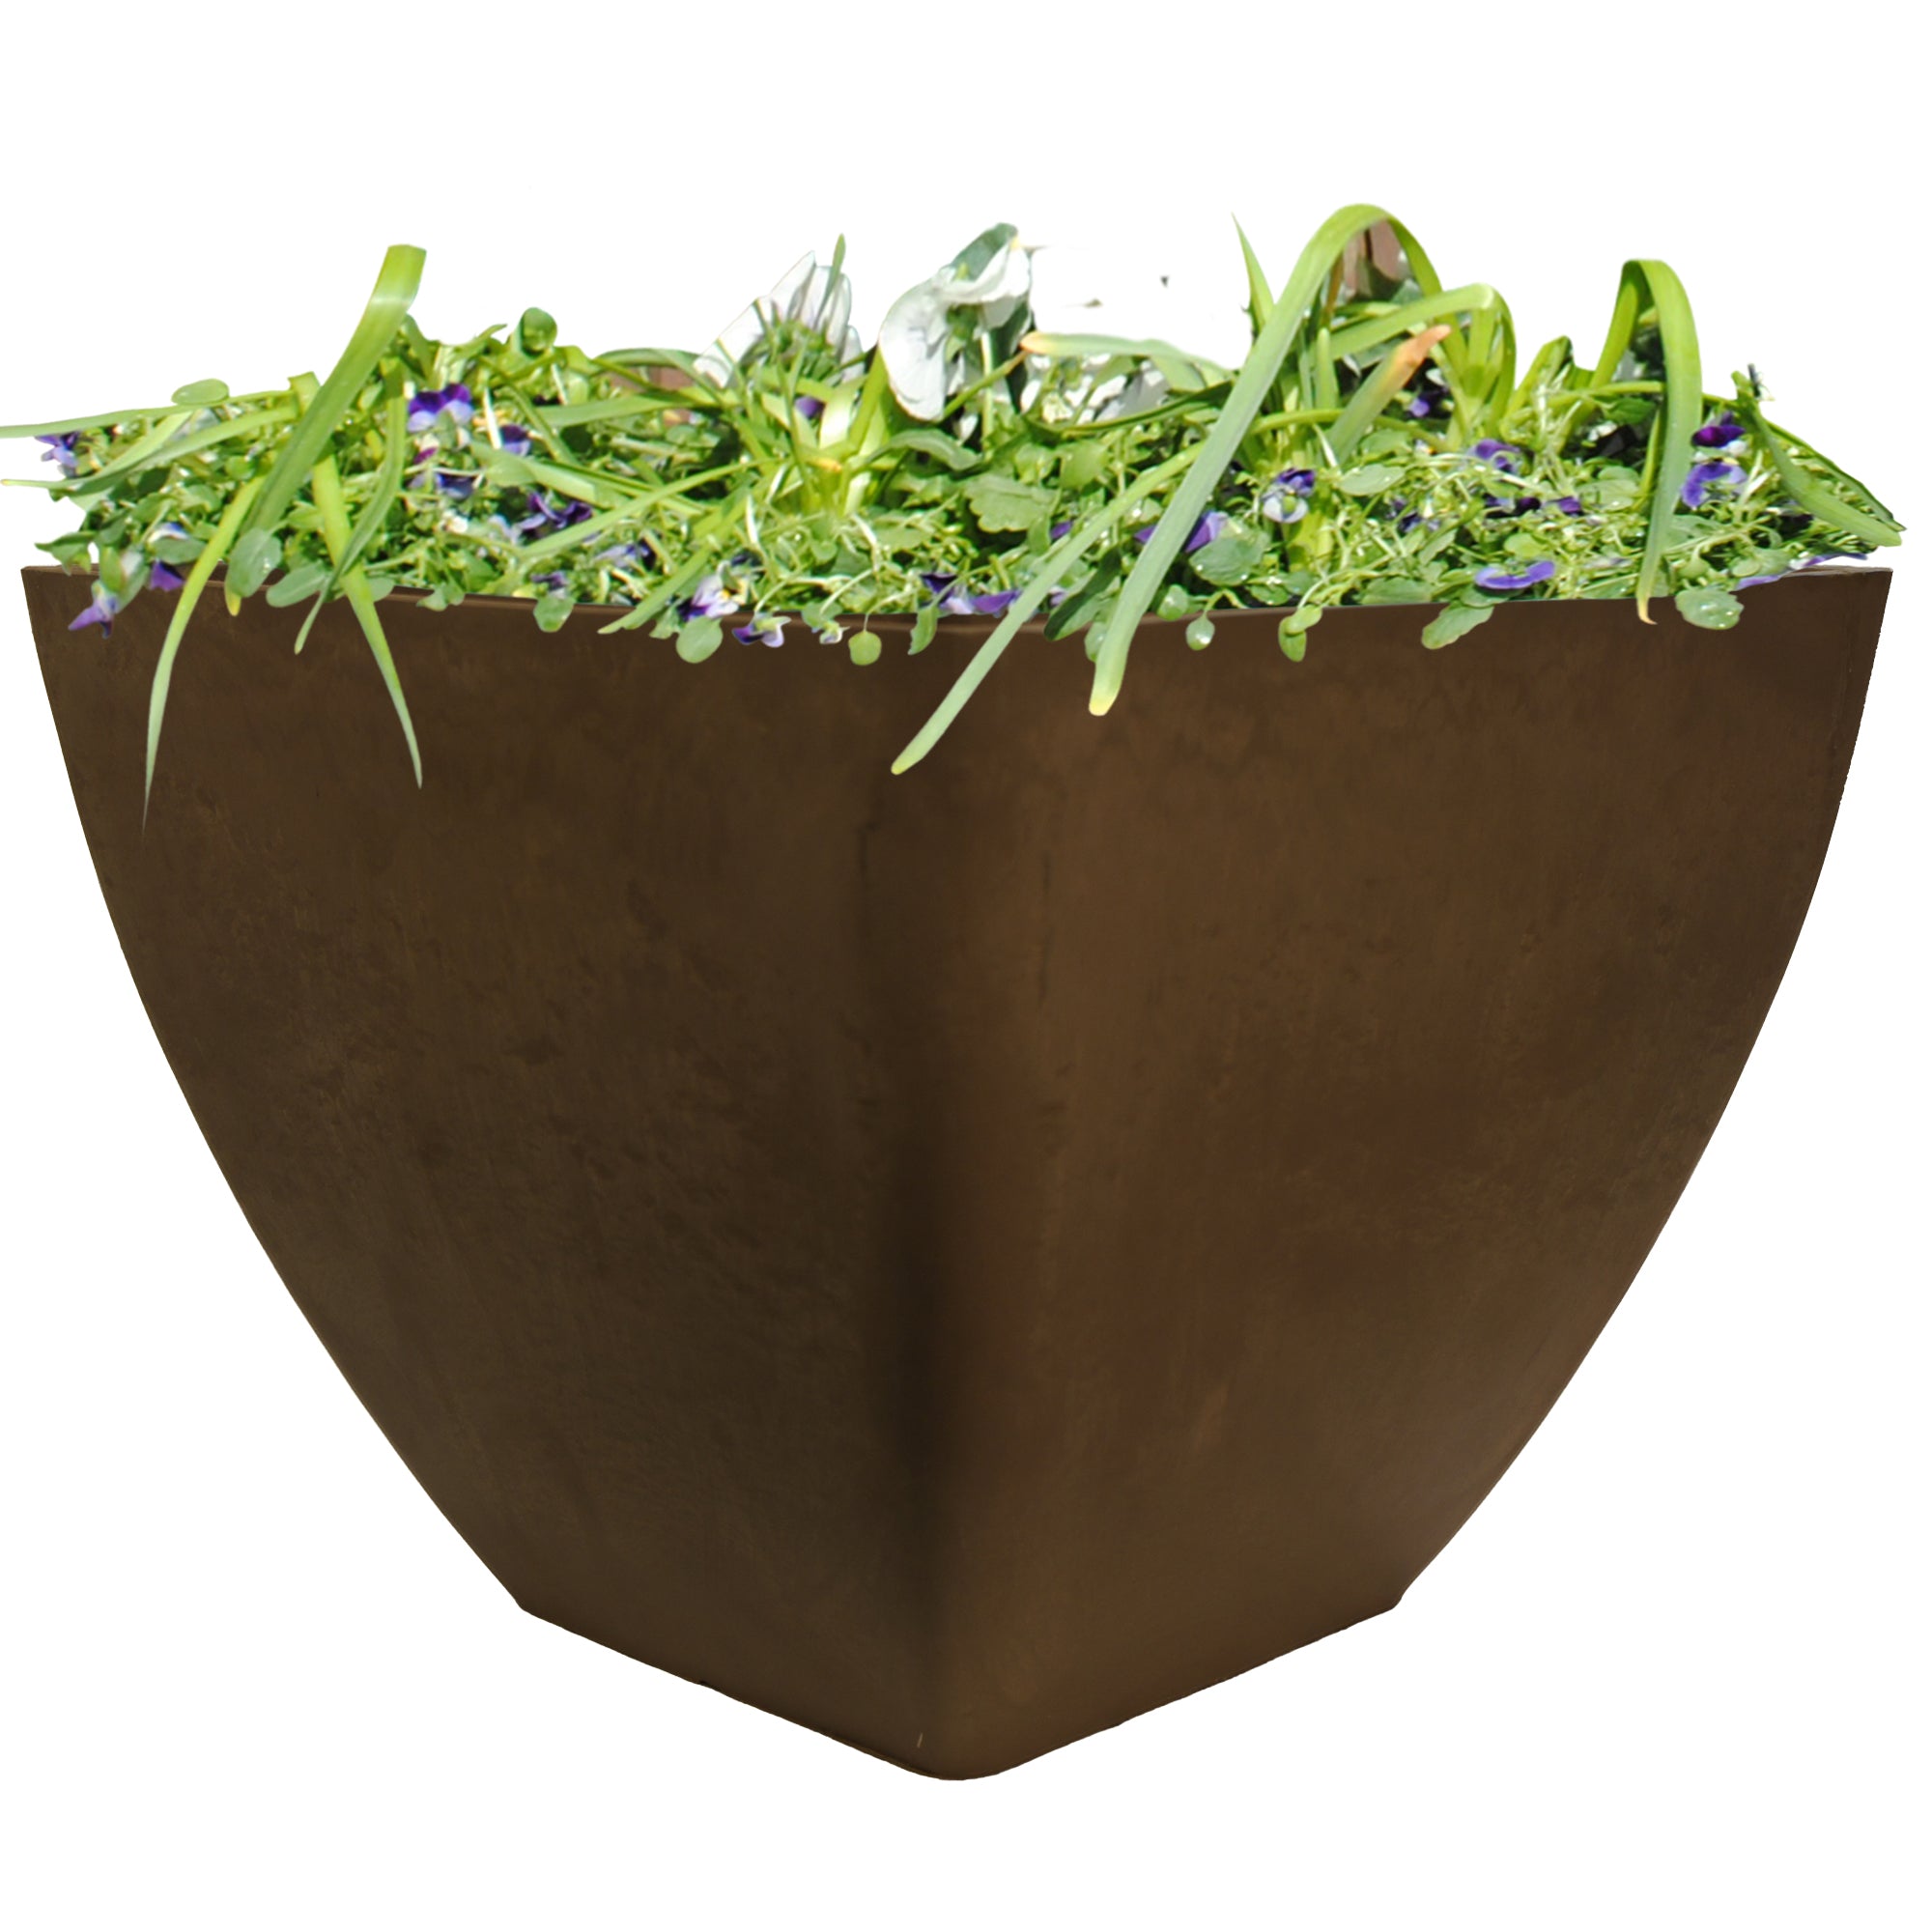 16 inch square planter in oak with flowers inside on a white background